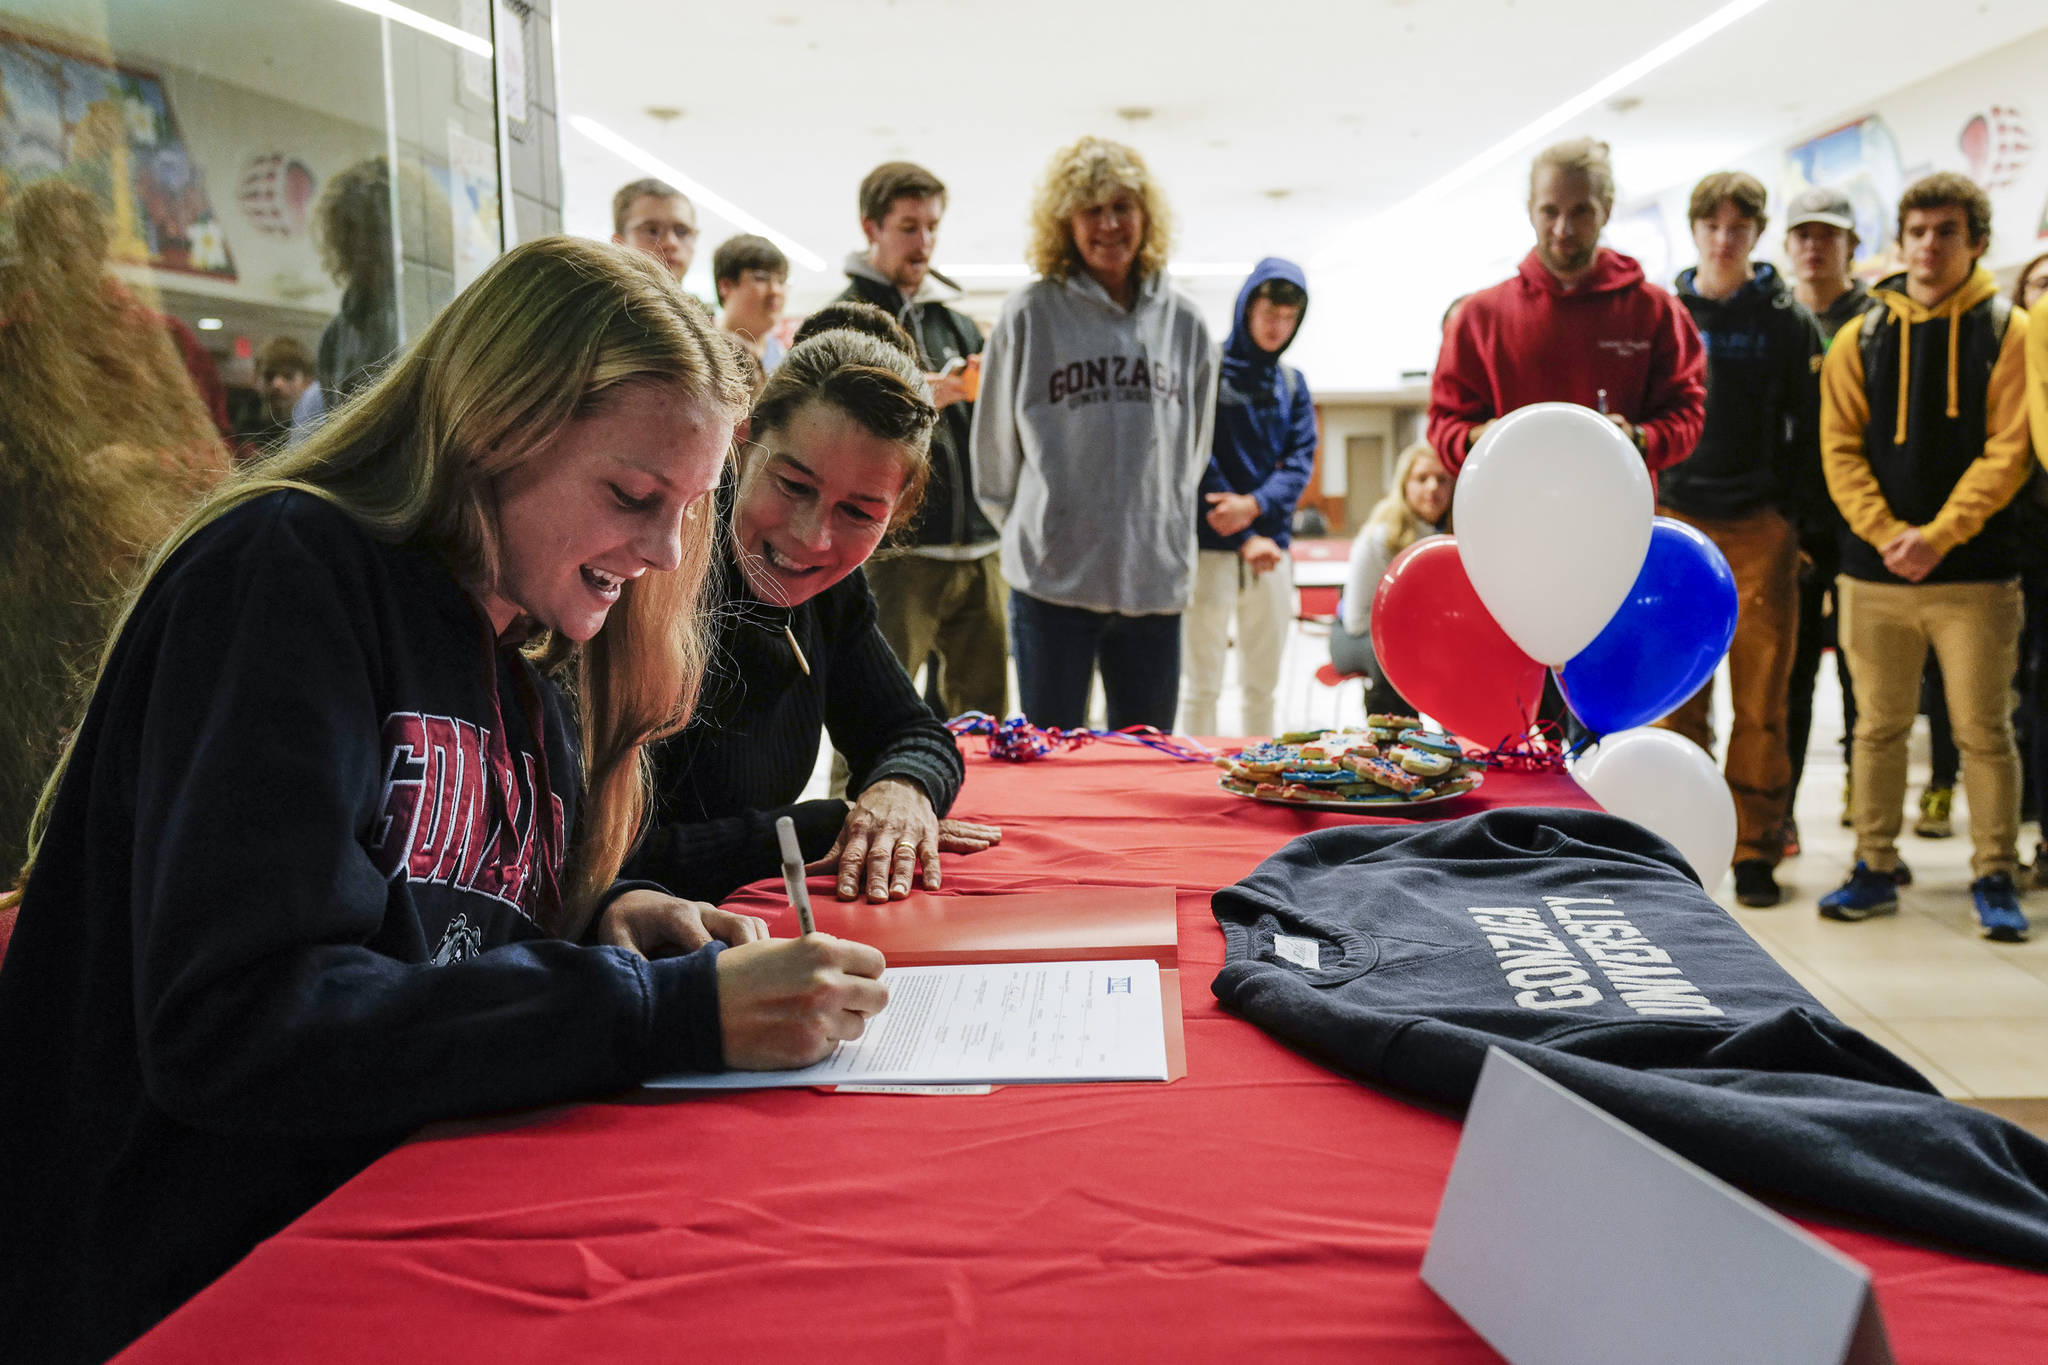 Juneau-Douglas High School: Yadaa.at Kalé senior Sadie Tuckwood signs a National Letter of Intent with Gonzaga University with her mother, Cindy, watching on Monday, Nov. 18, 2019. (Michael Penn | Juneau Empire)